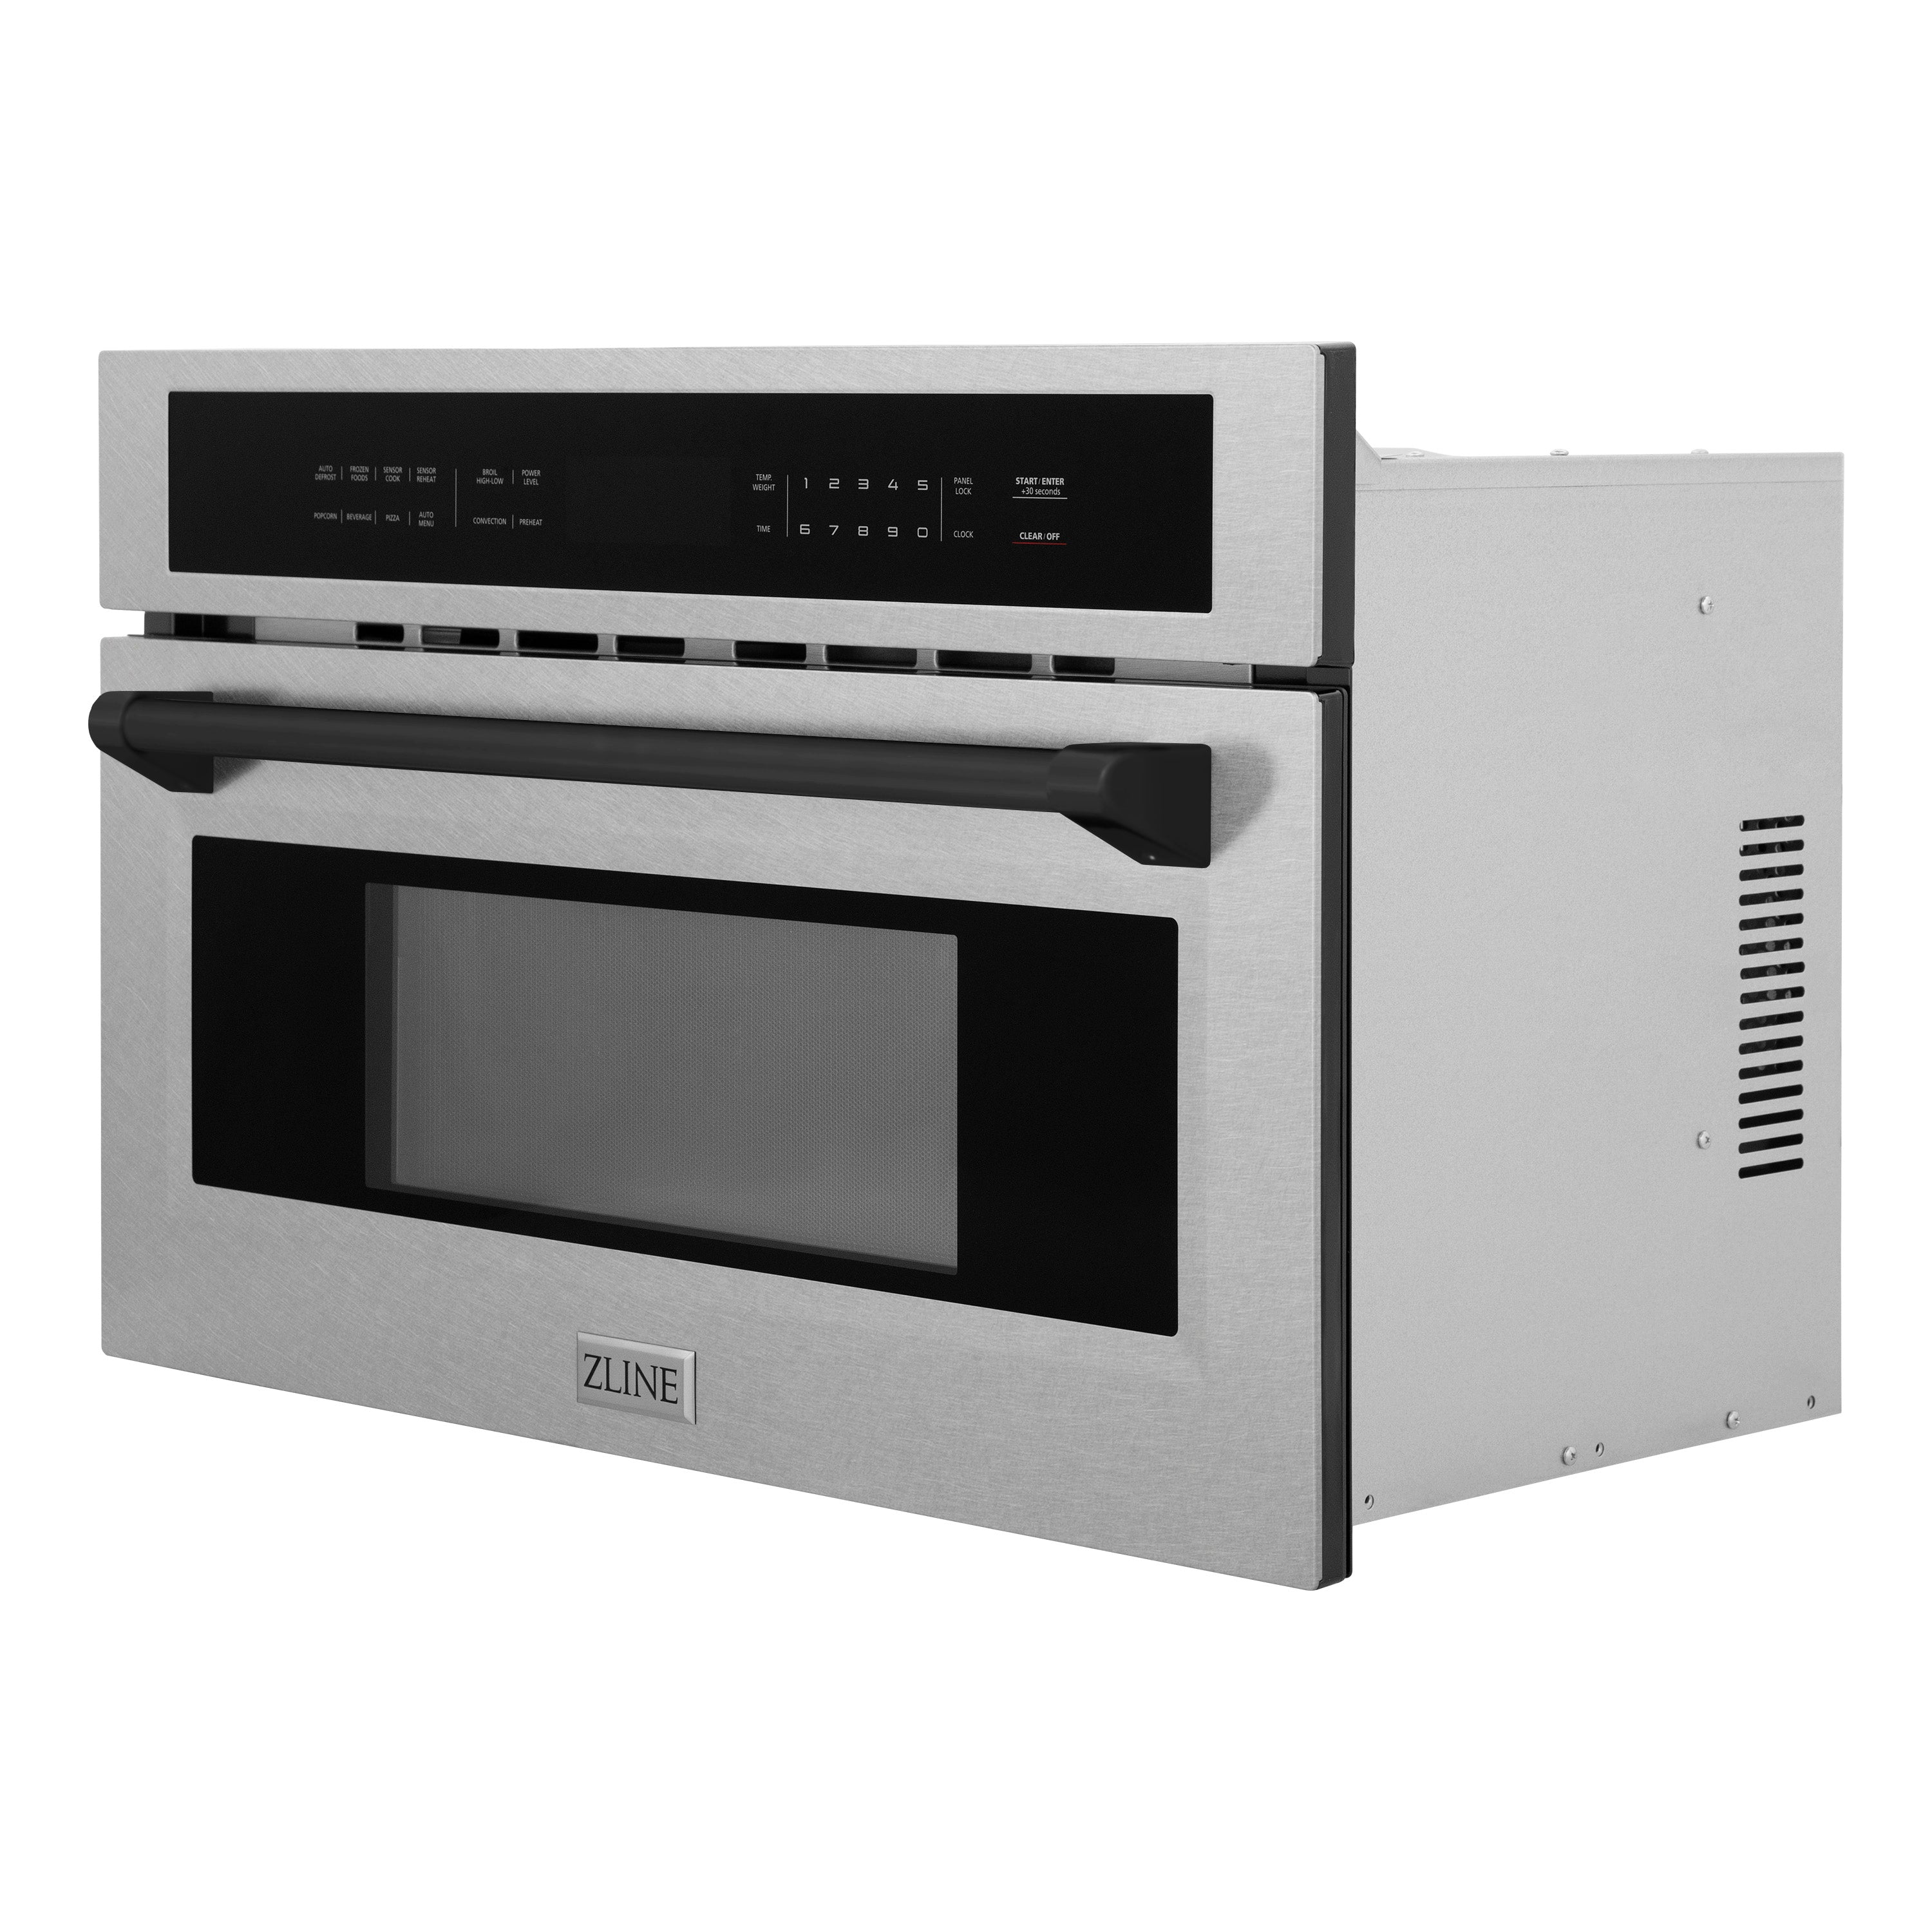 ZLINE Autograph Edition 30 in. 1.6 cu ft. Built-in Convection Microwave Oven in Fingerprint Resistant Stainless Steel with Matte Black Accents (MWOZ-30-SS-MB) Side View Door Closed